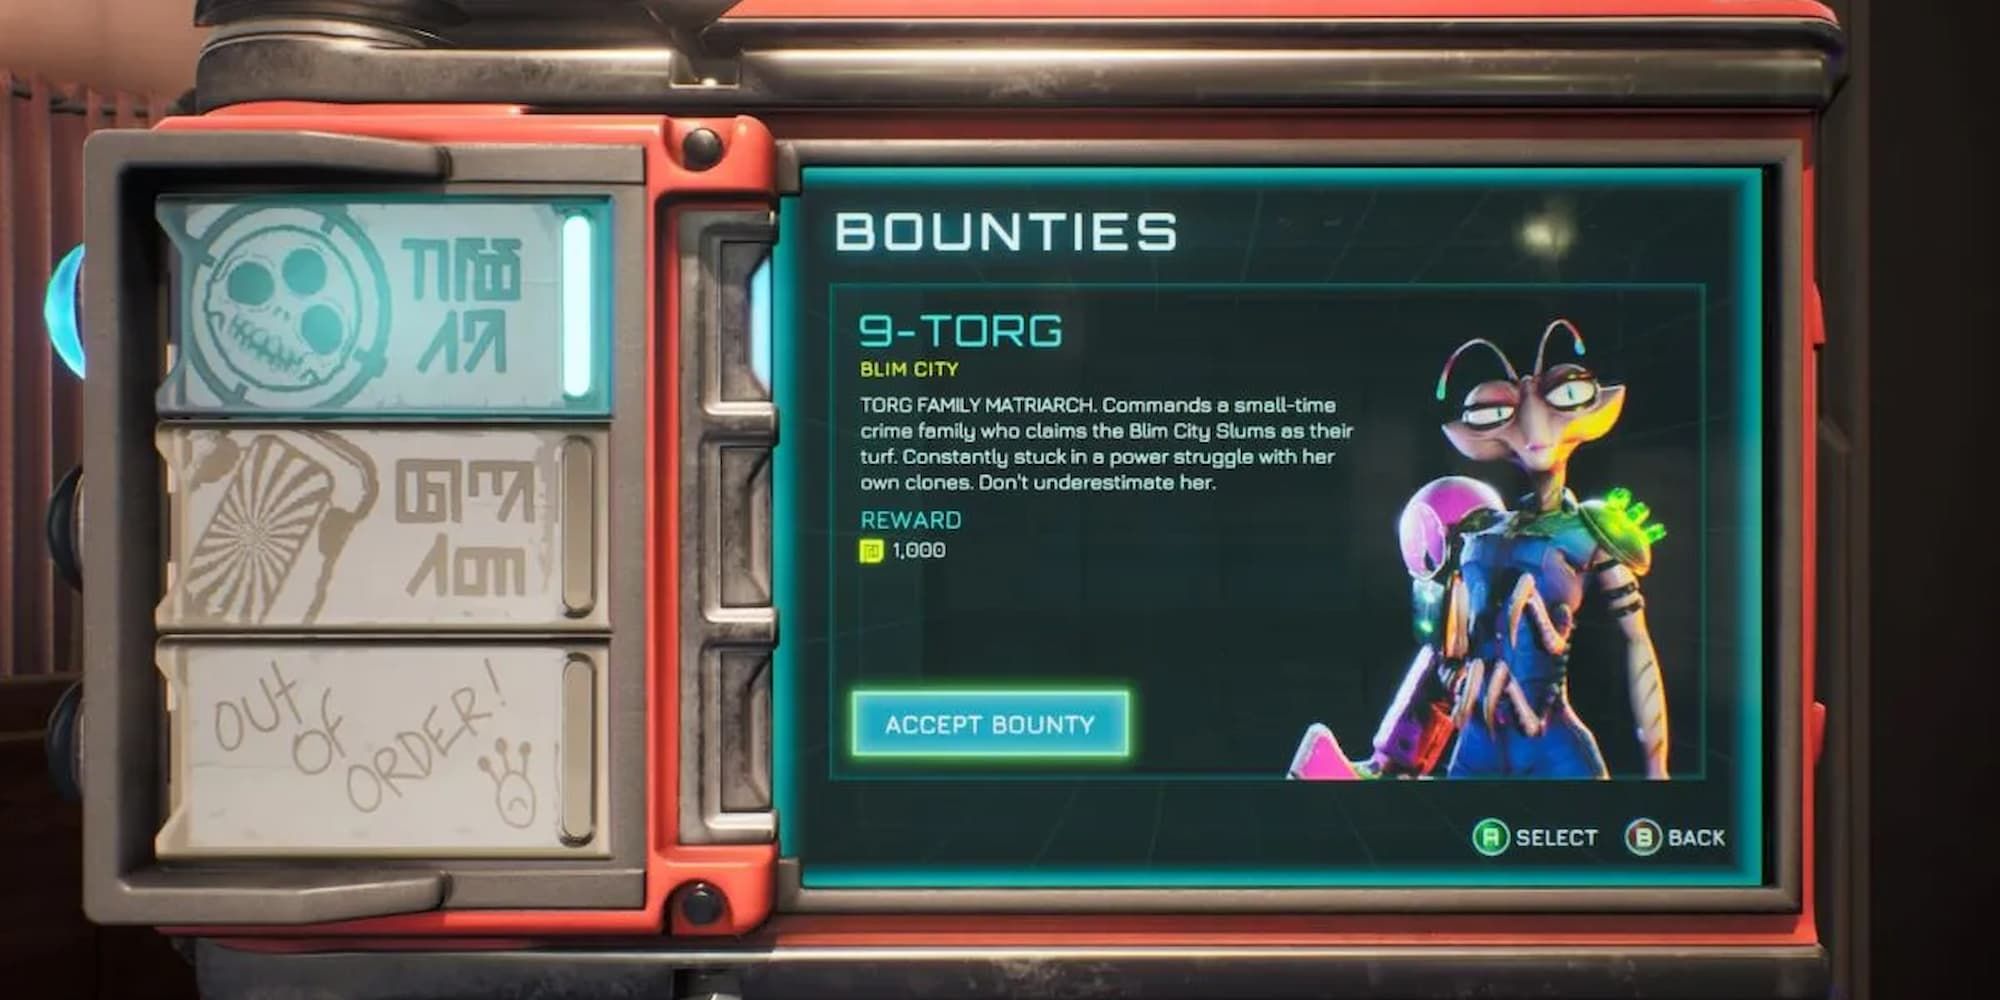 The Bounty Board in High on Life shows the bounty for 9-Torg is available in Blim City.